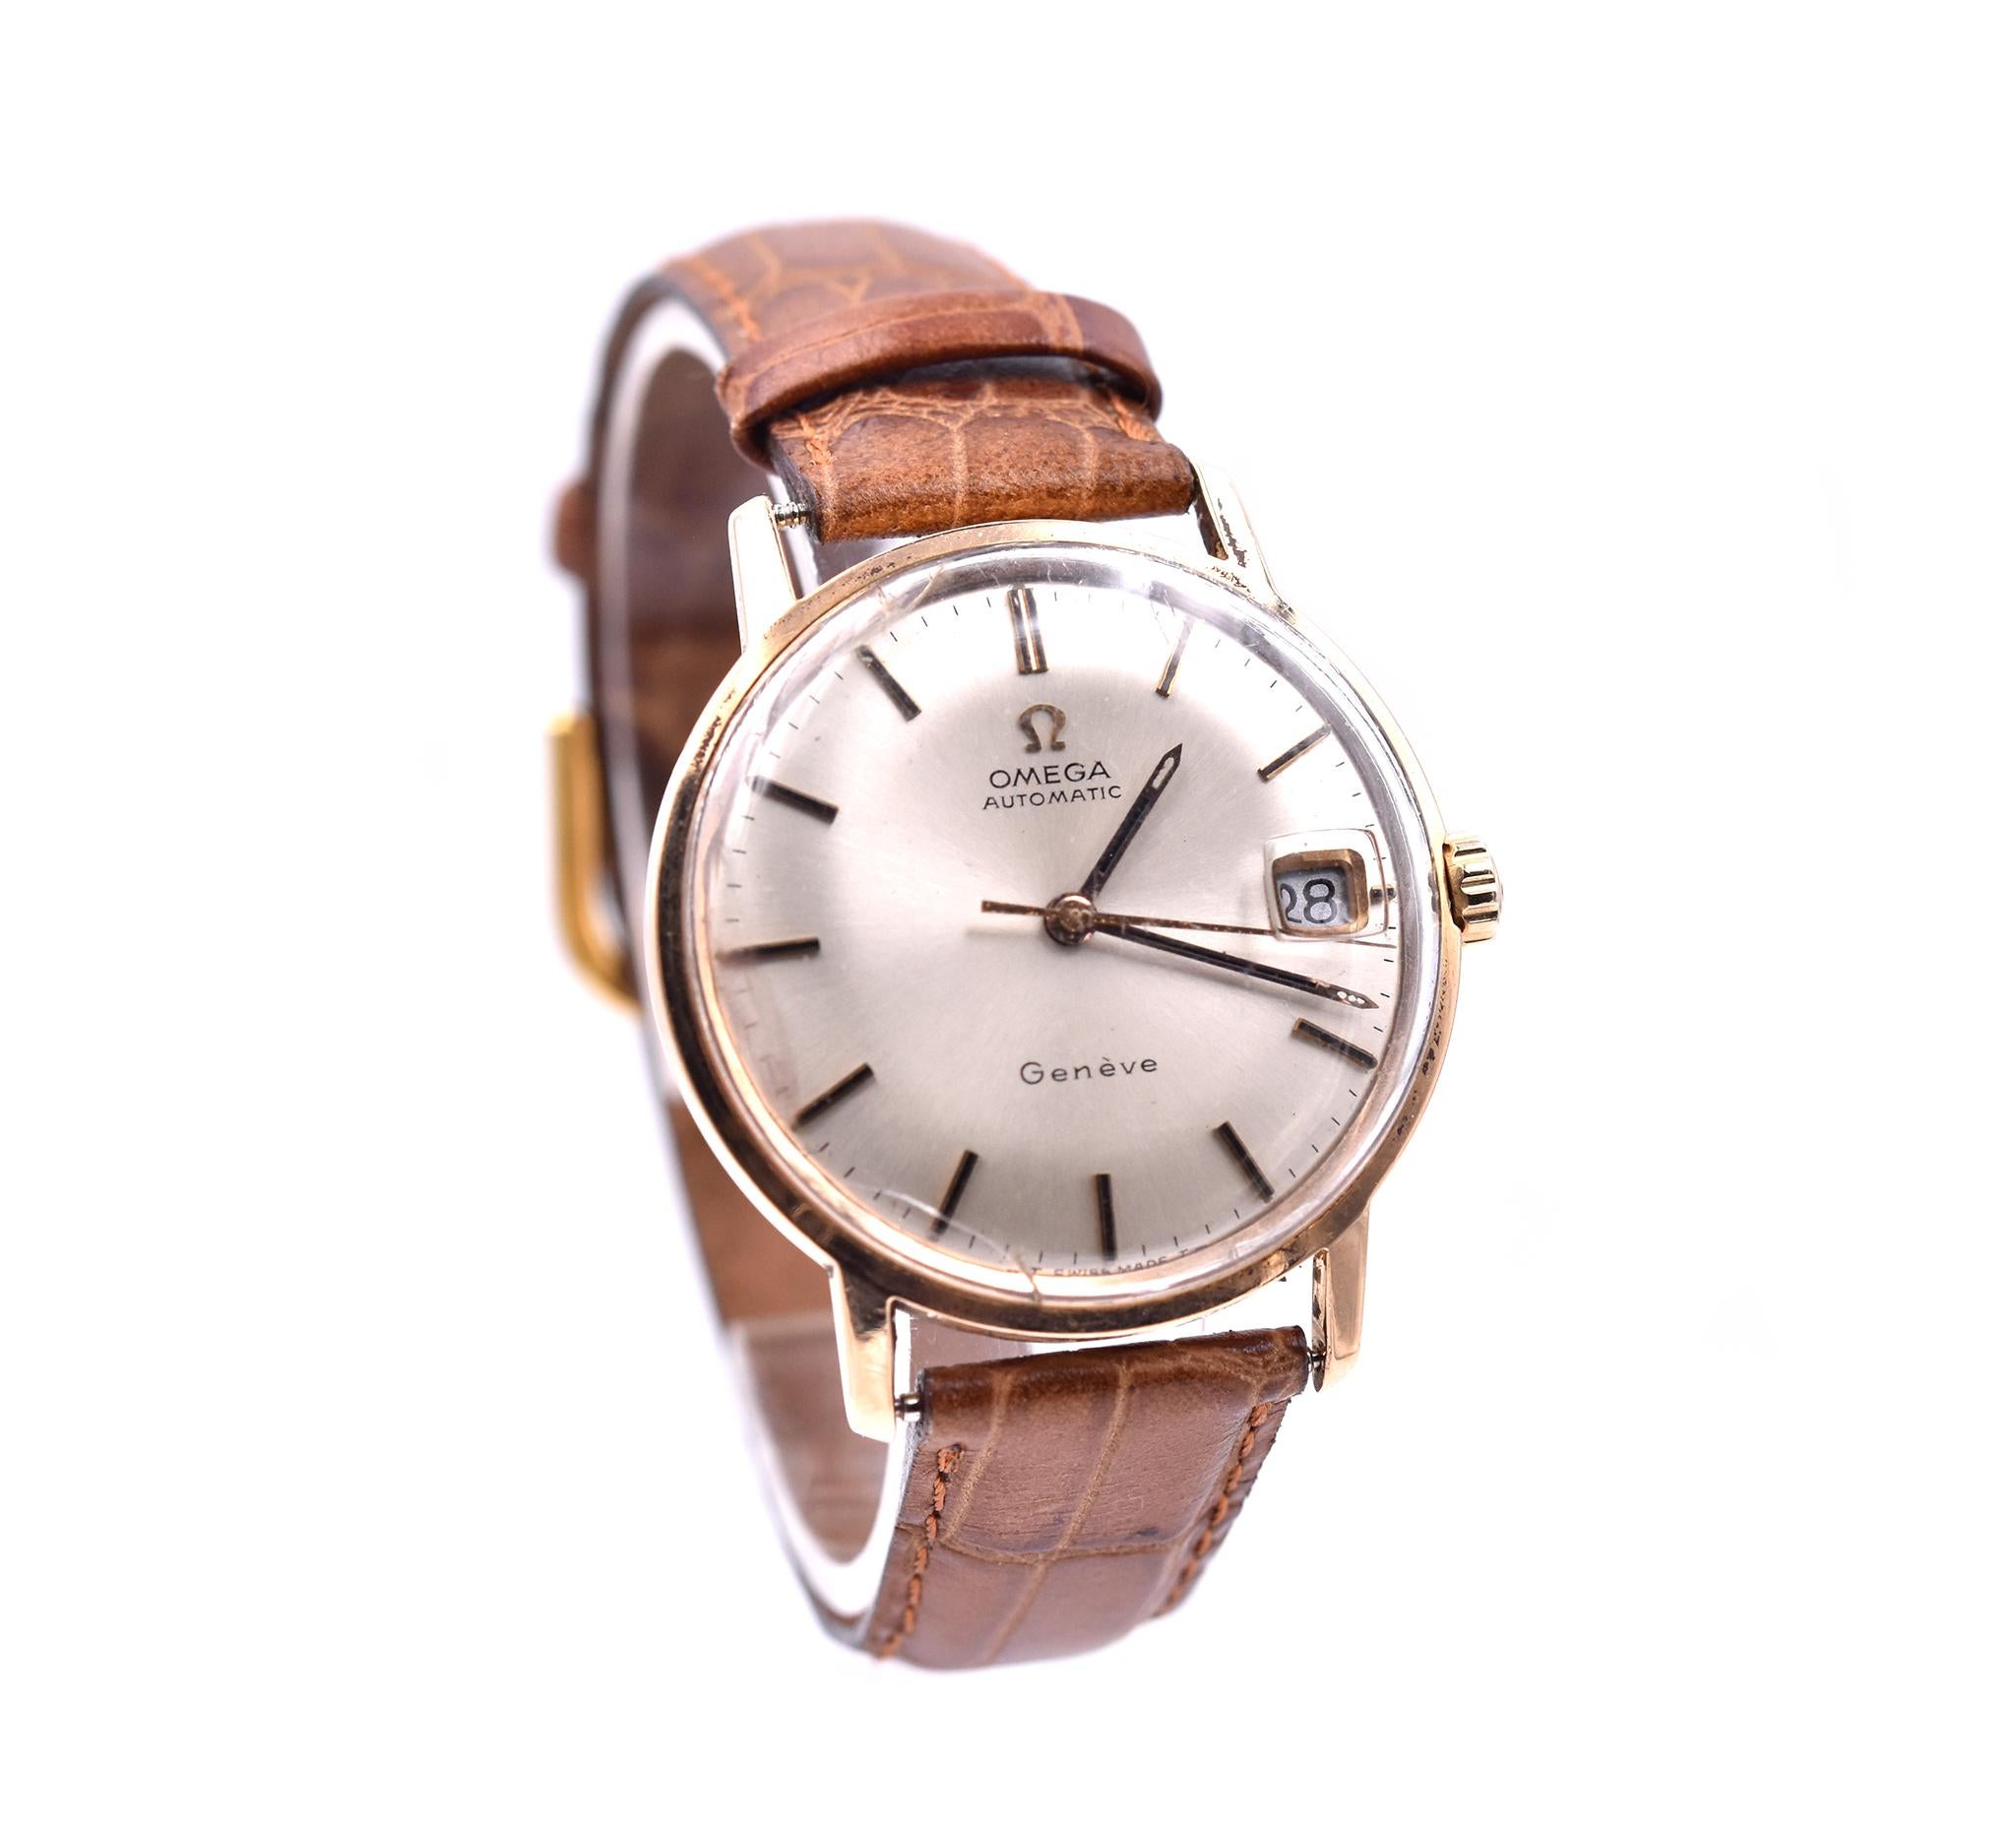 Brand: Omega
Movement: automatic
Function: hours, minutes, seconds, date
Case: 33mm case, sapphire crystal, screw down crown,
Band: brown leather strap with buckle
Dial: silver stick dial
Movement Serial #: 26395XXX
Casse Reference #: 166037


No